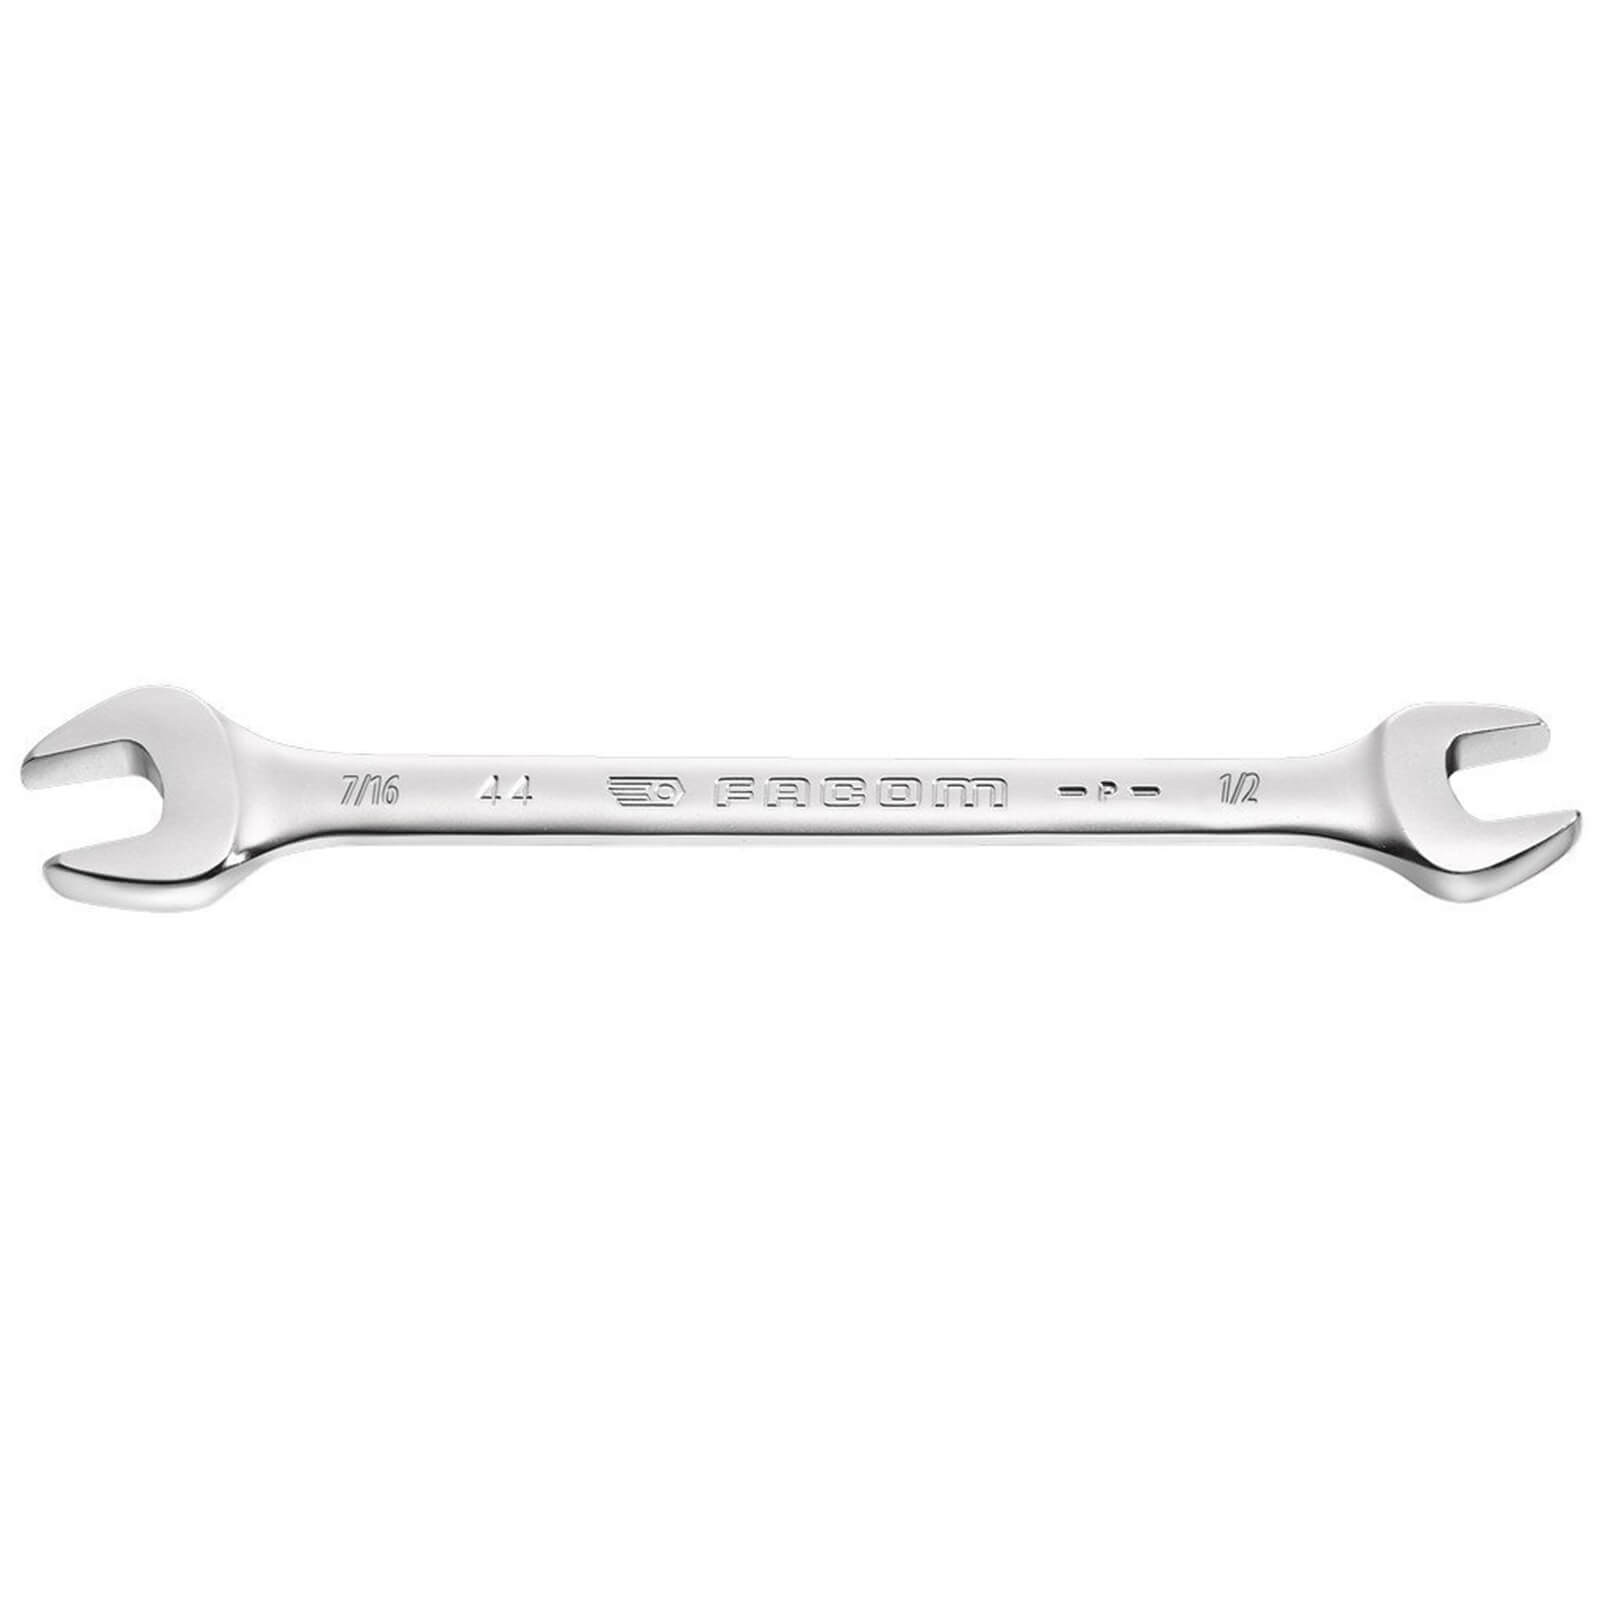 Image of Facom Open Ended Spanner Imperial 1" x 1" 1/16"